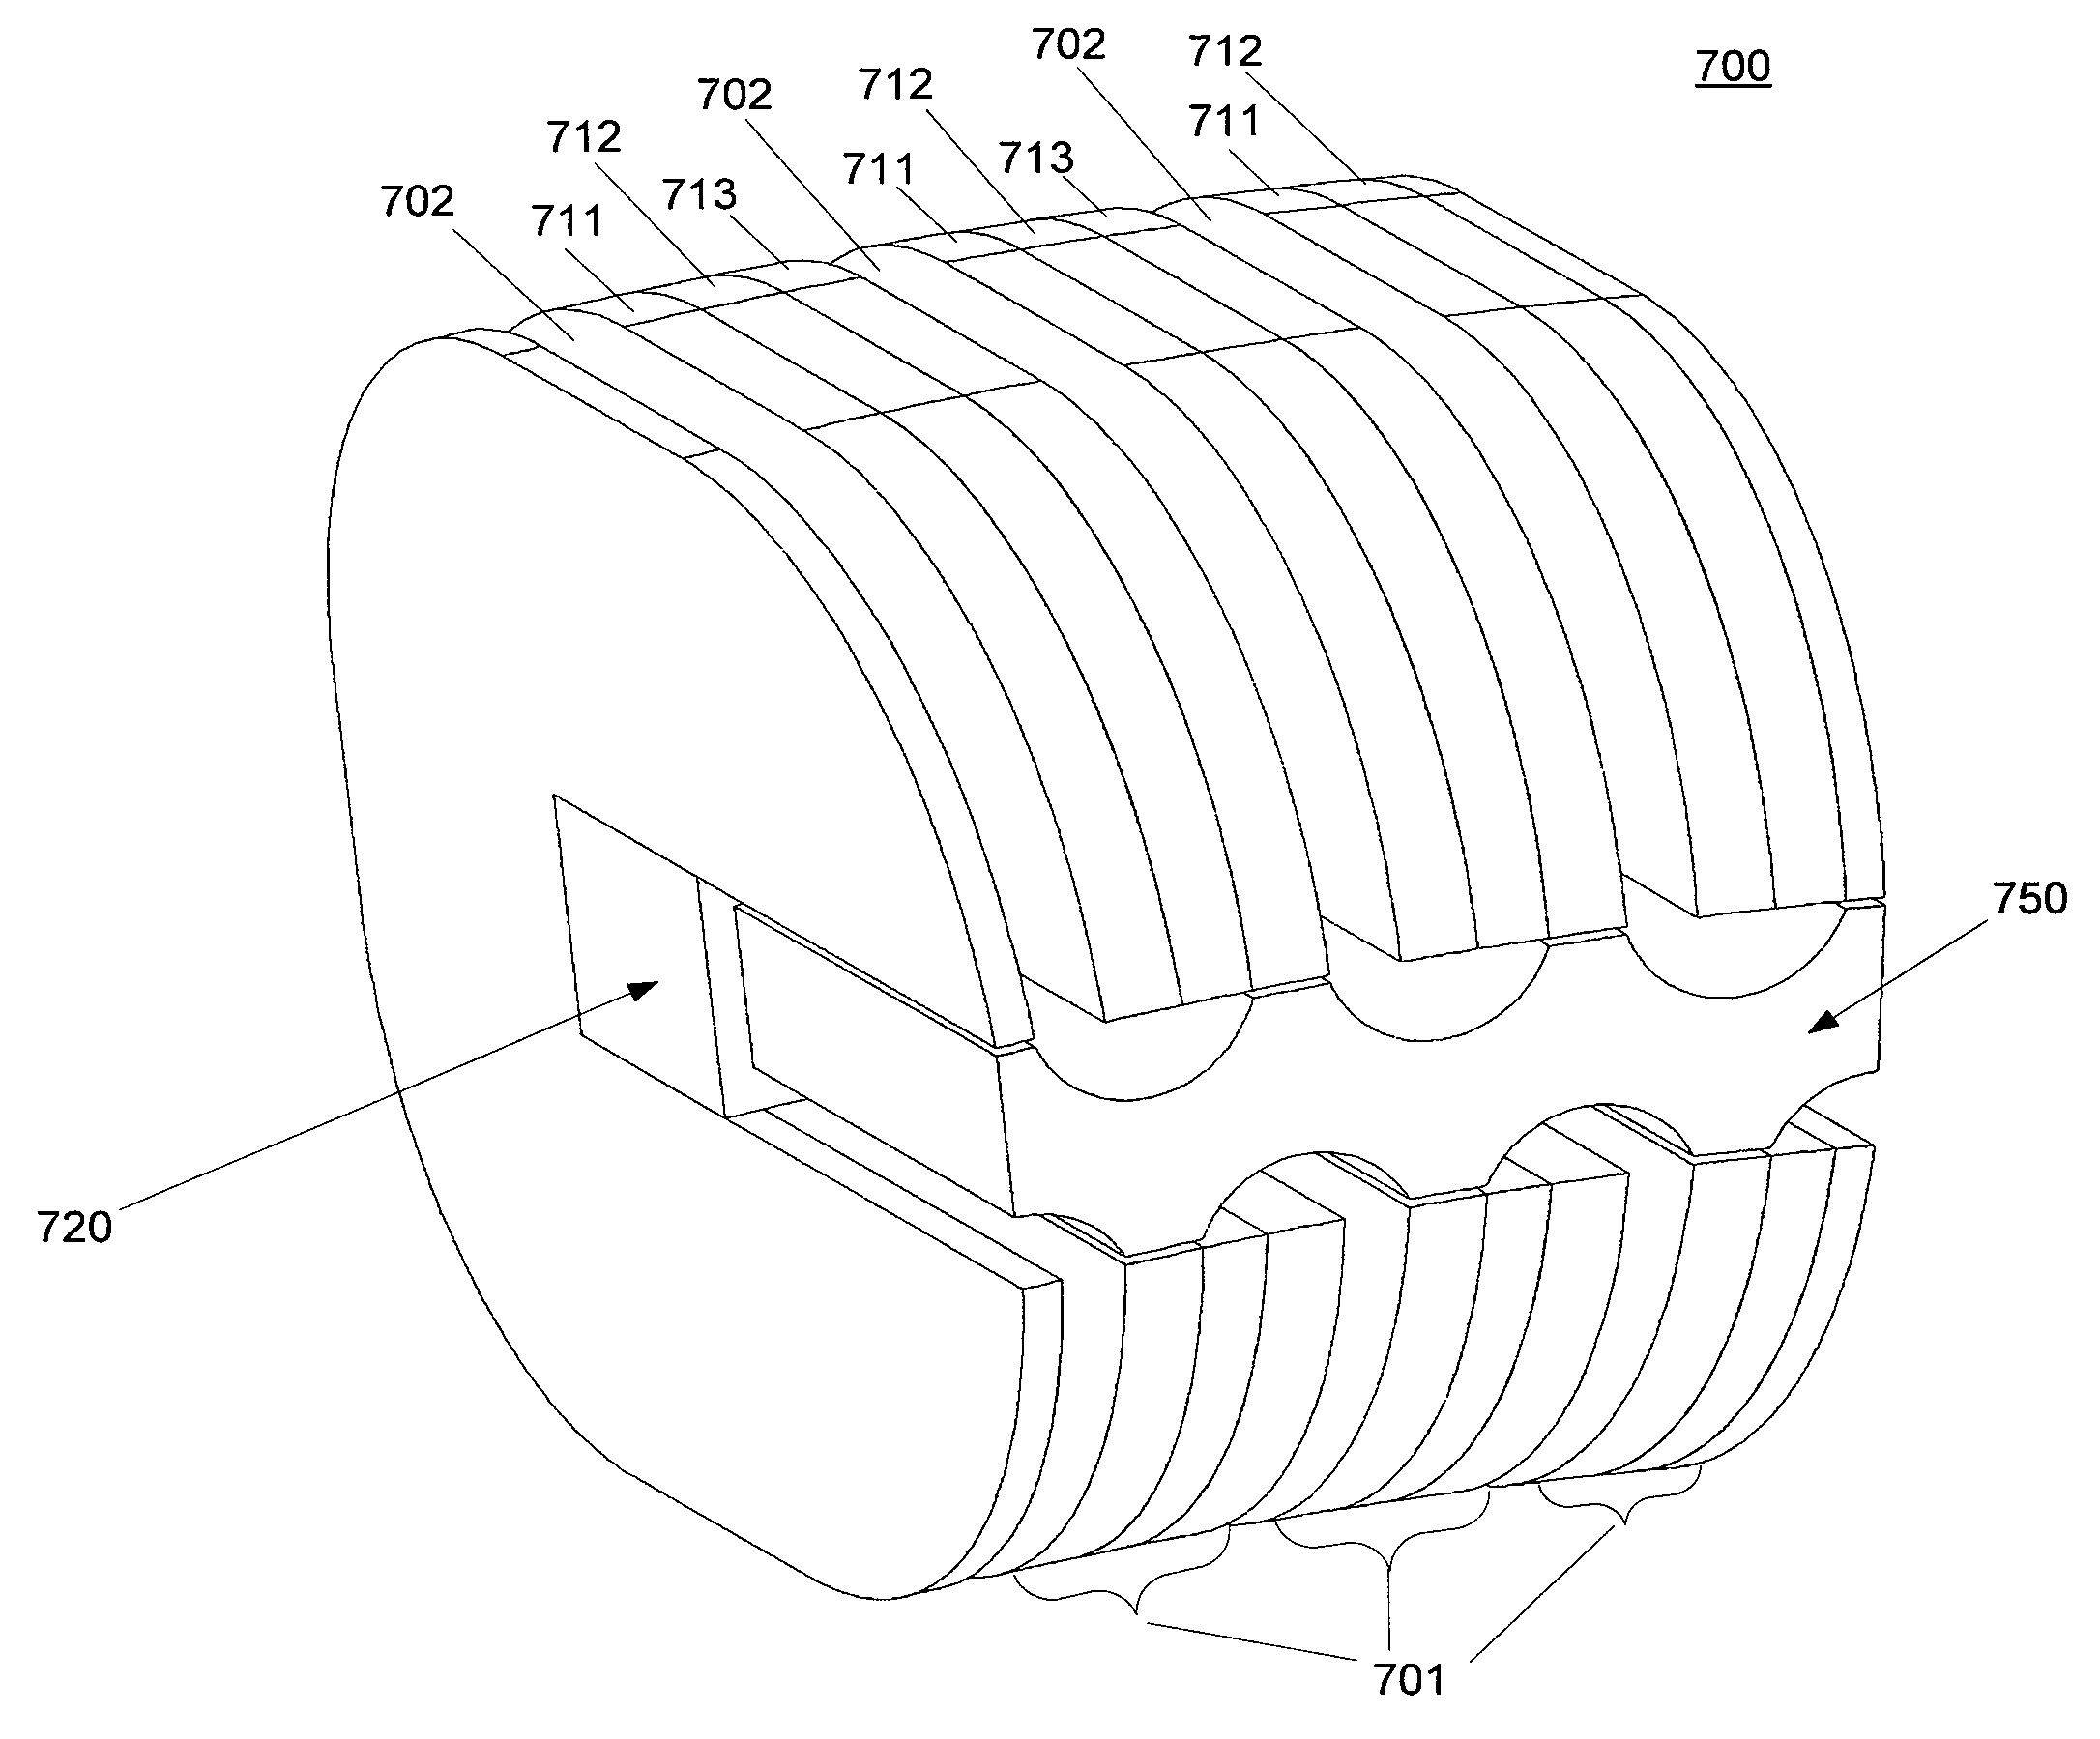 Transverse and/or commutated flux system stator concepts